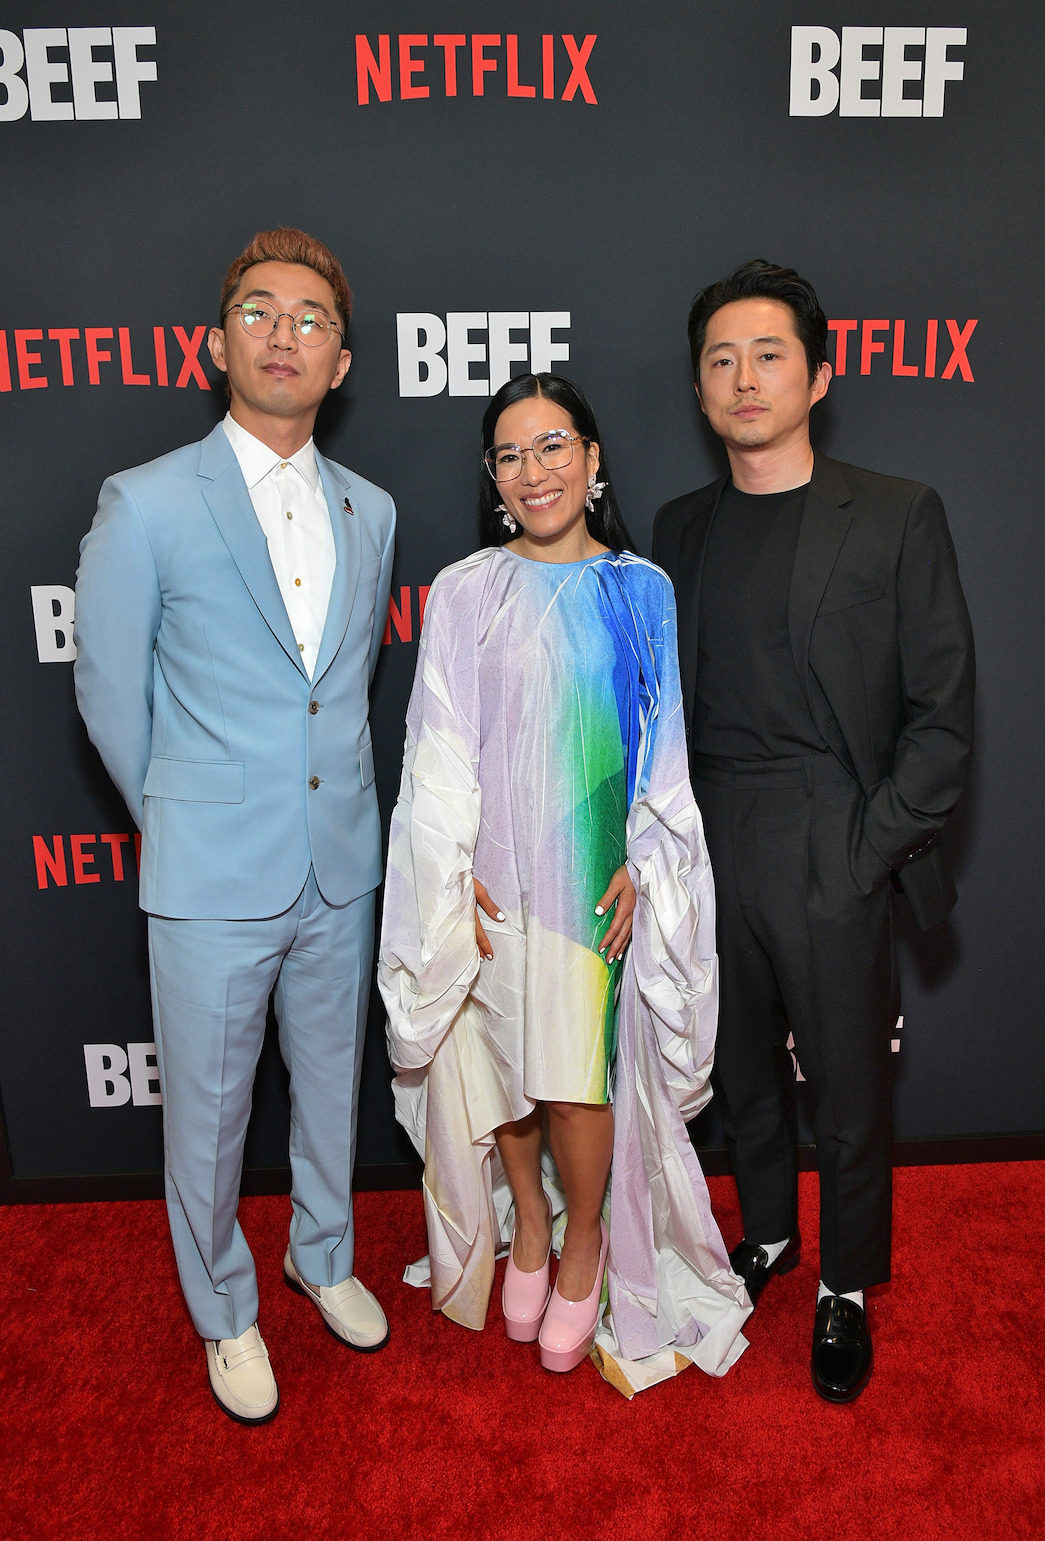 Lee Sung Jin, Ali Wong and Steven Yeun at the Los Angeles Premiere of Netflix's "BEEF" on March 30, 2023 in Hollywood, California.